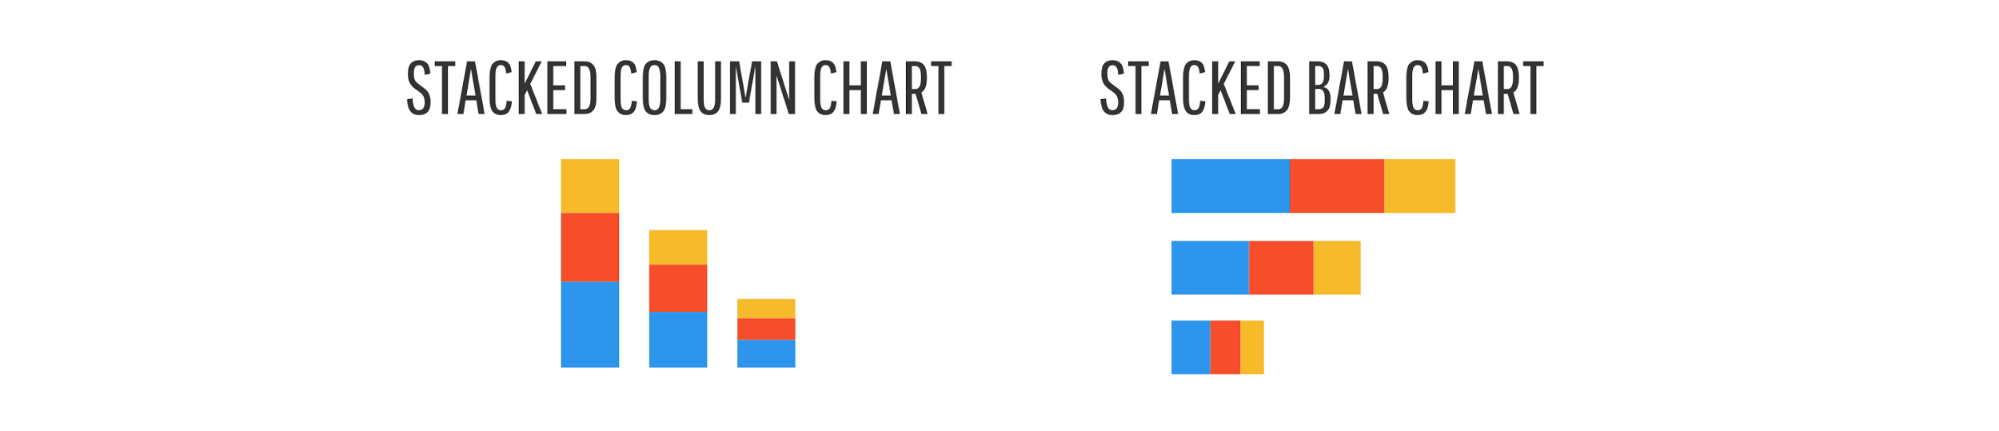 Stacked column chart, stacked bar chart